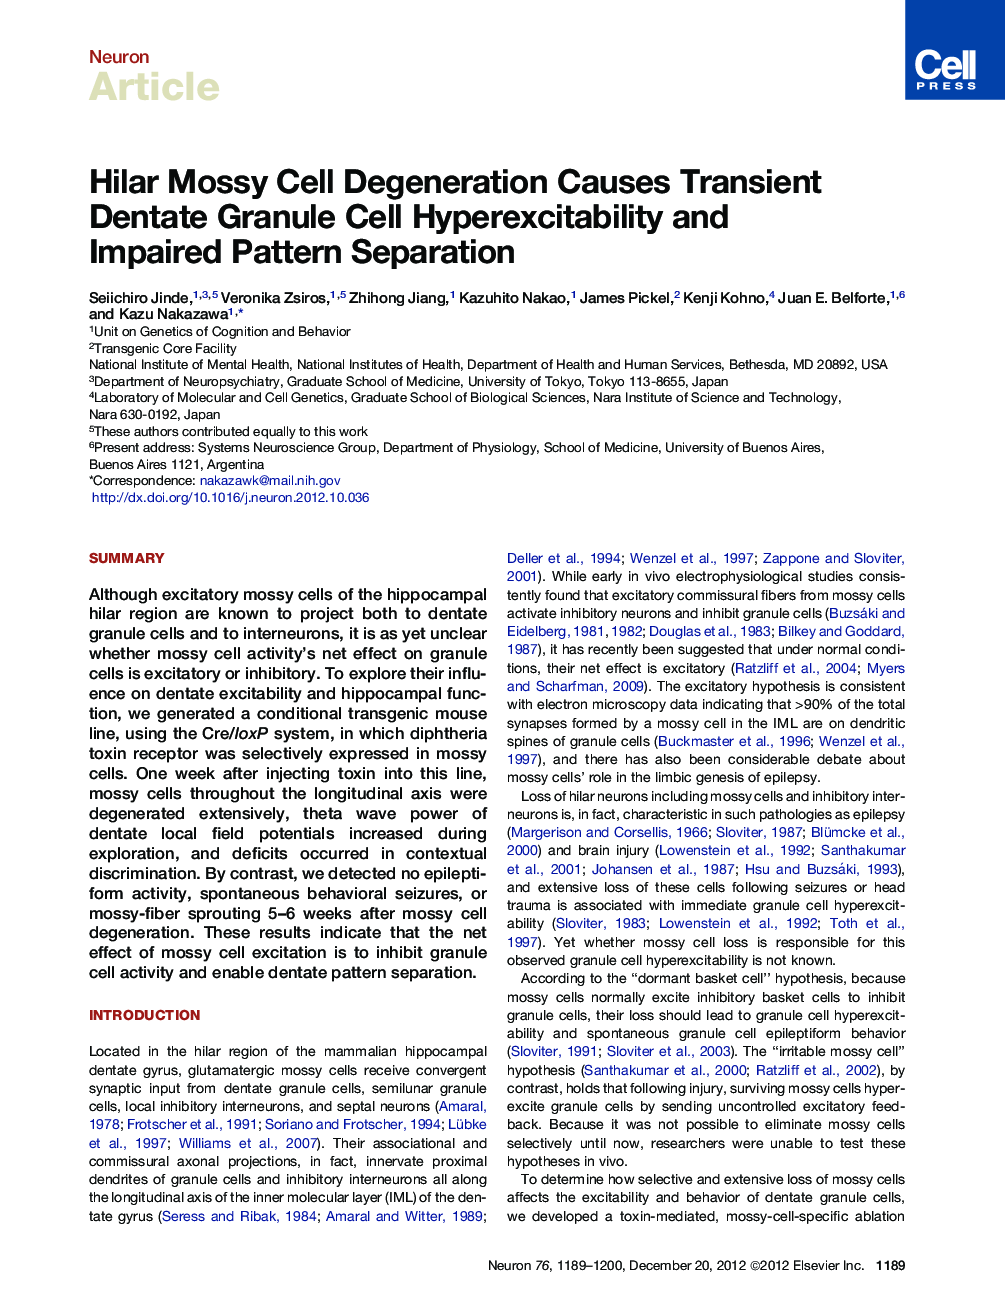 Hilar Mossy Cell Degeneration Causes Transient Dentate Granule Cell Hyperexcitability and Impaired Pattern Separation